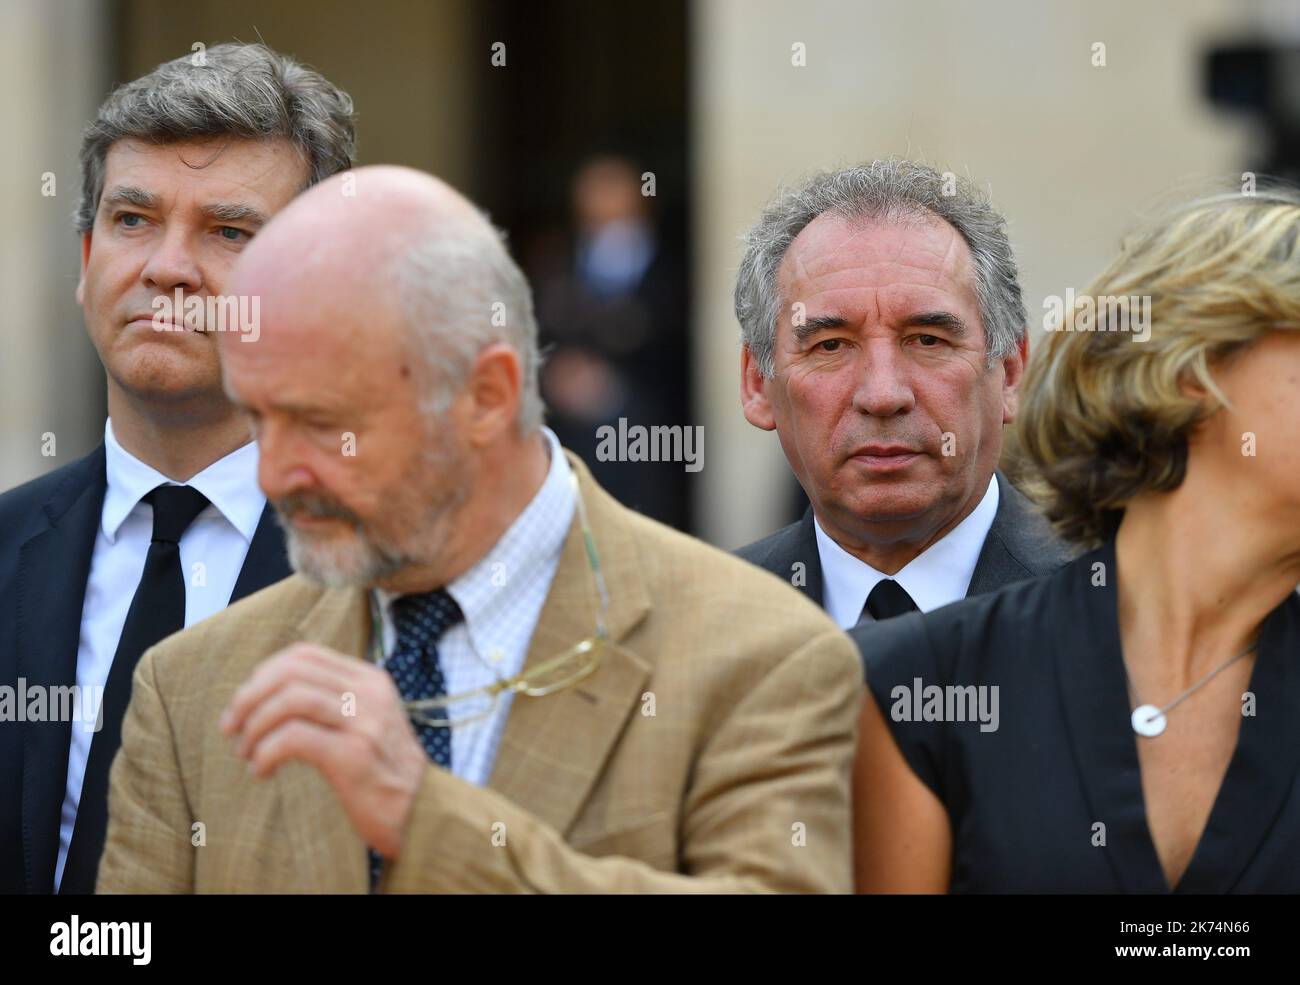 Arnaud Montebourg and Francois Bayrou during the funeral ceremony for Simone Veil, in the courtyard of the Invalides in Paris, France, 05 July 2017. Holocaust survivors are joining France's president and European dignitaries at a special memorial ceremony for Simone Veil, who rose from the horrors of Nazi death camps to become president of the European Parliament and one of France's most revered politicians LTG Stock Photo